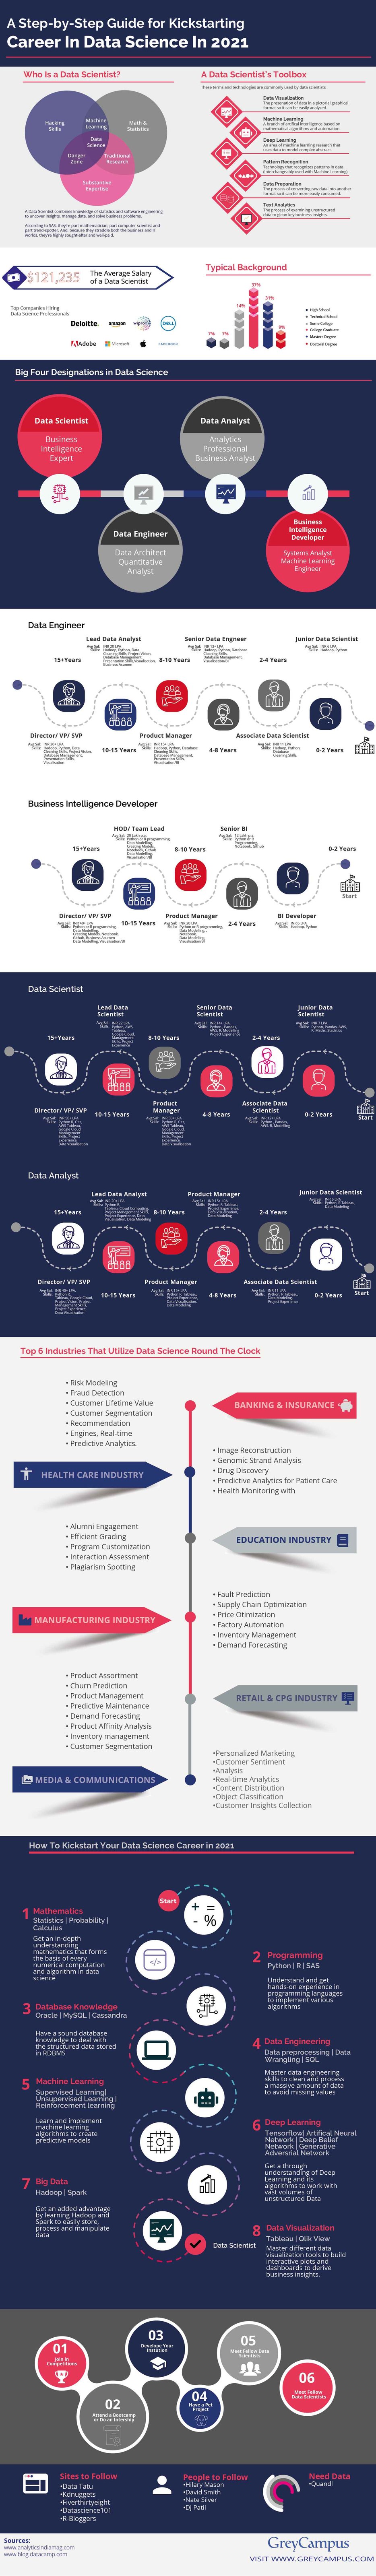 Data Science: Everything you need to know!